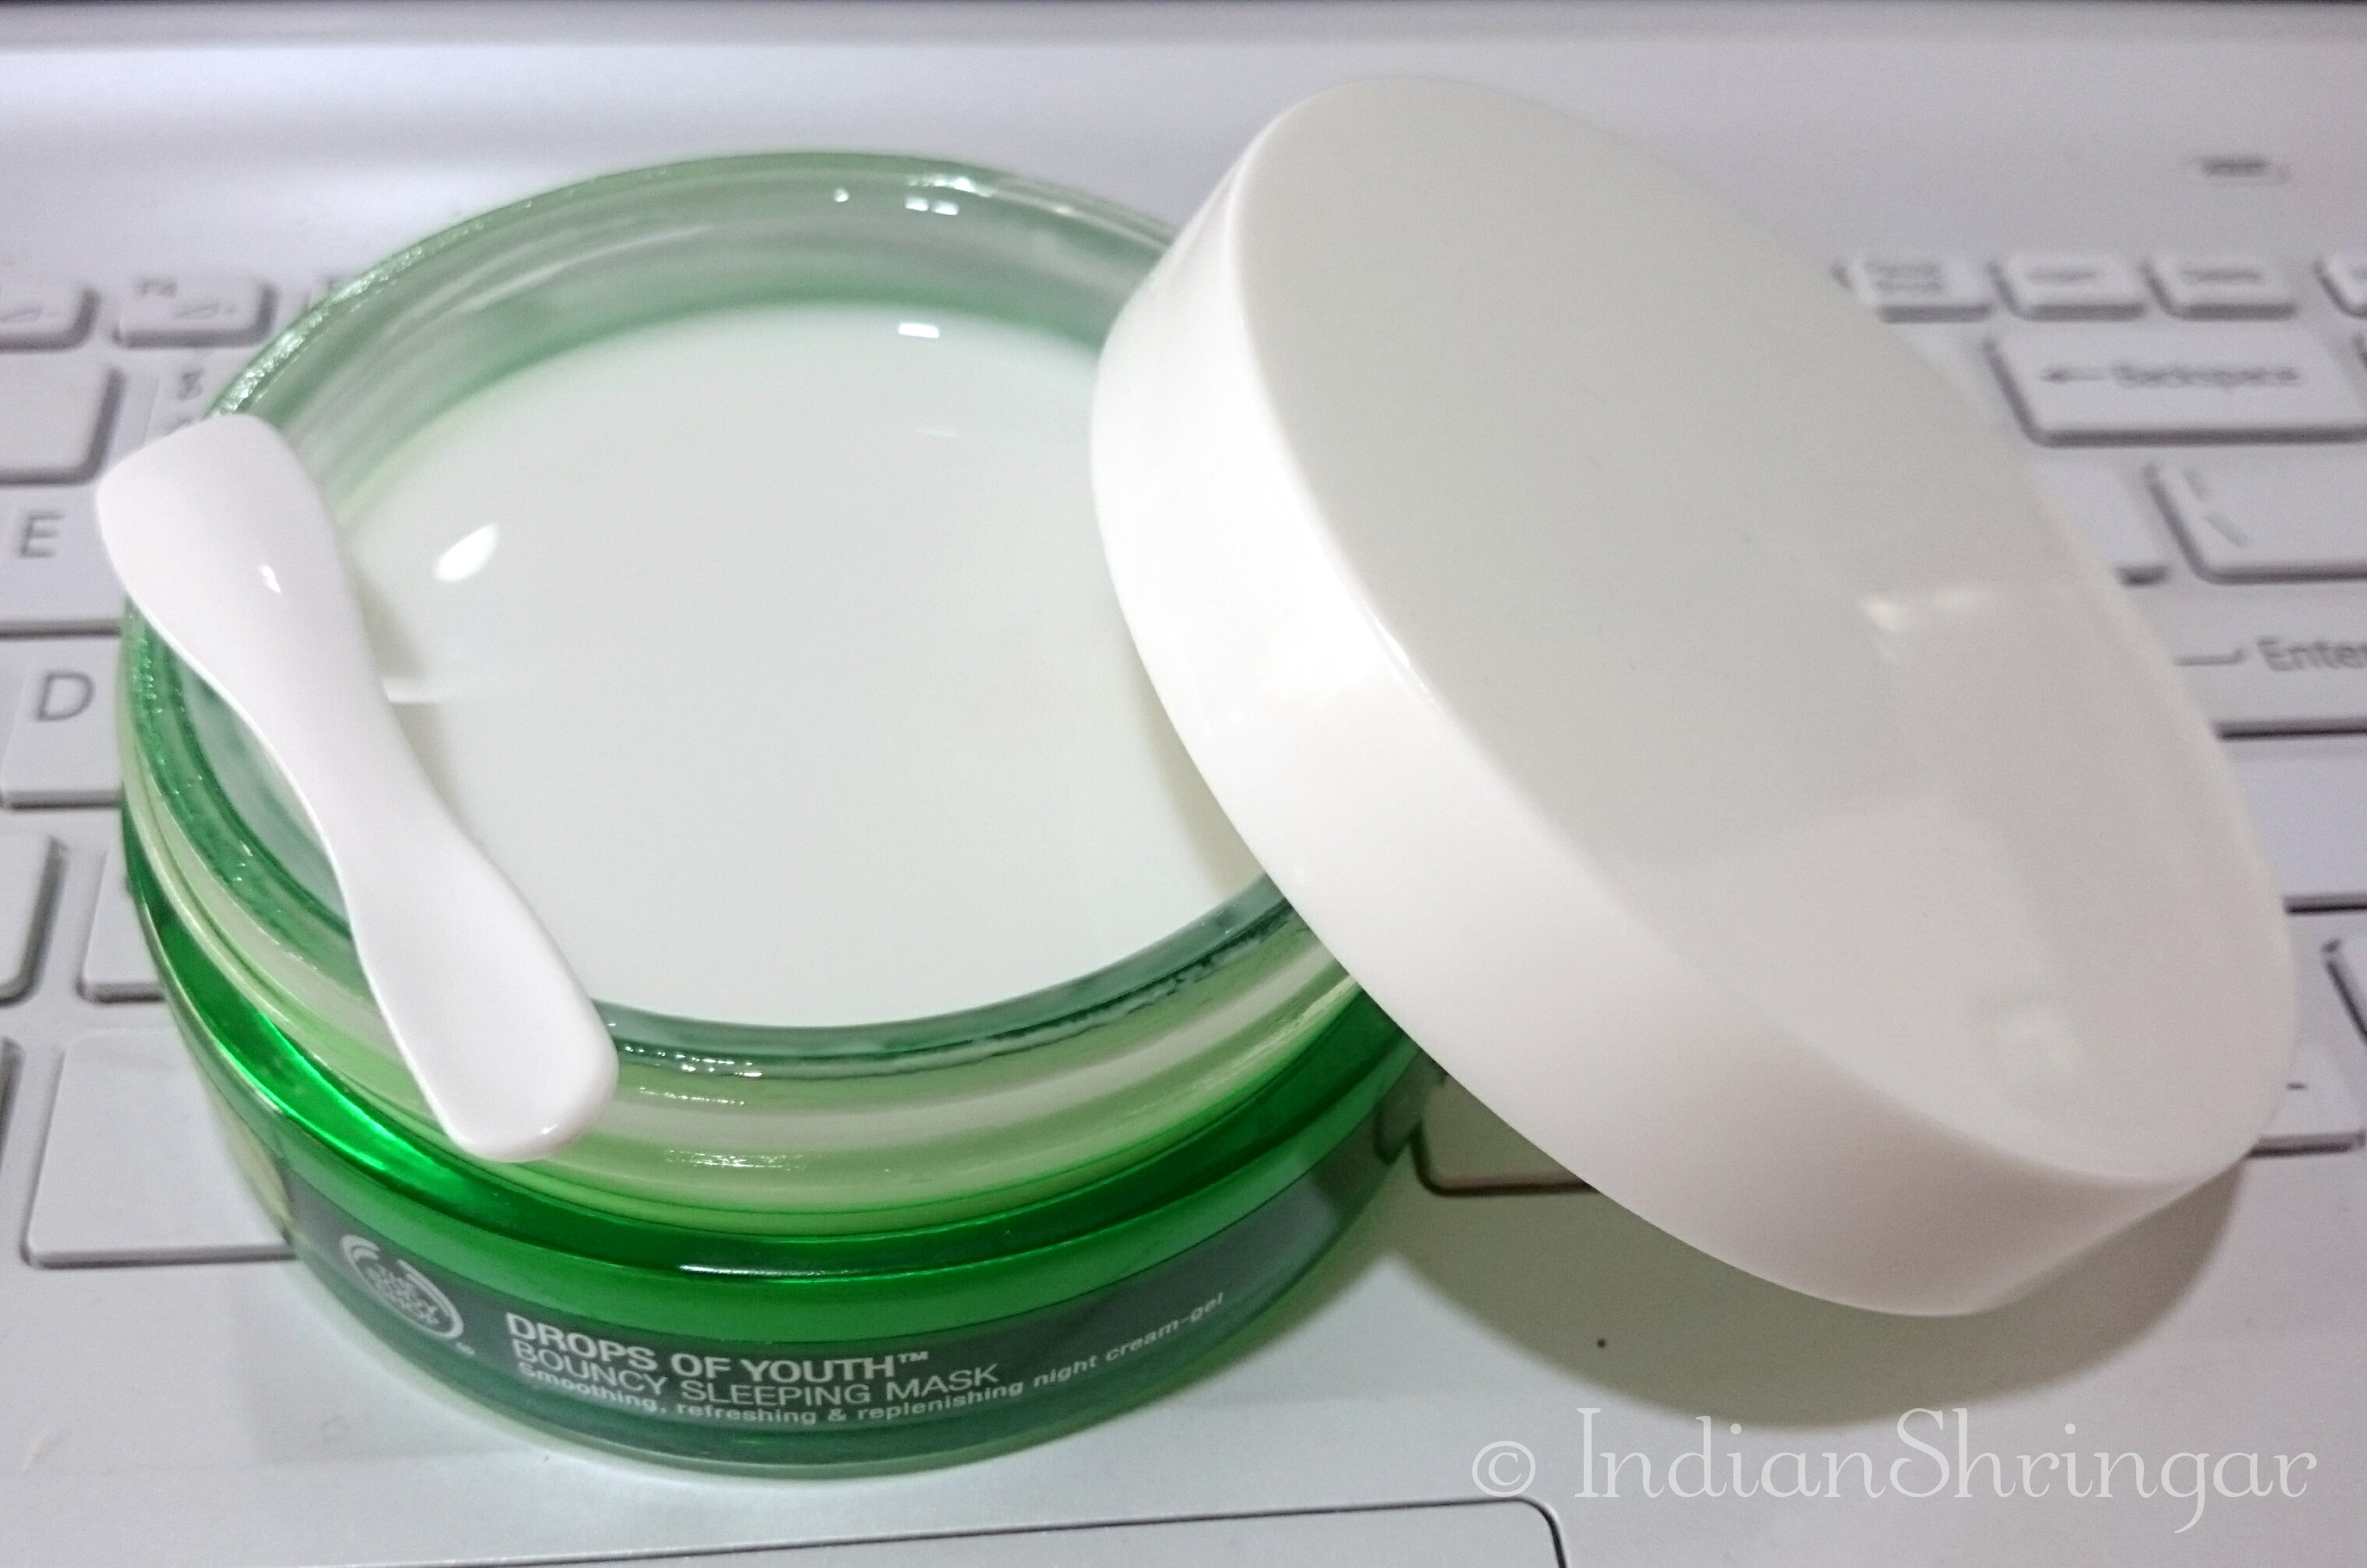 The Body Shop Drops Of Youth Bouncy Sleeping Mask review